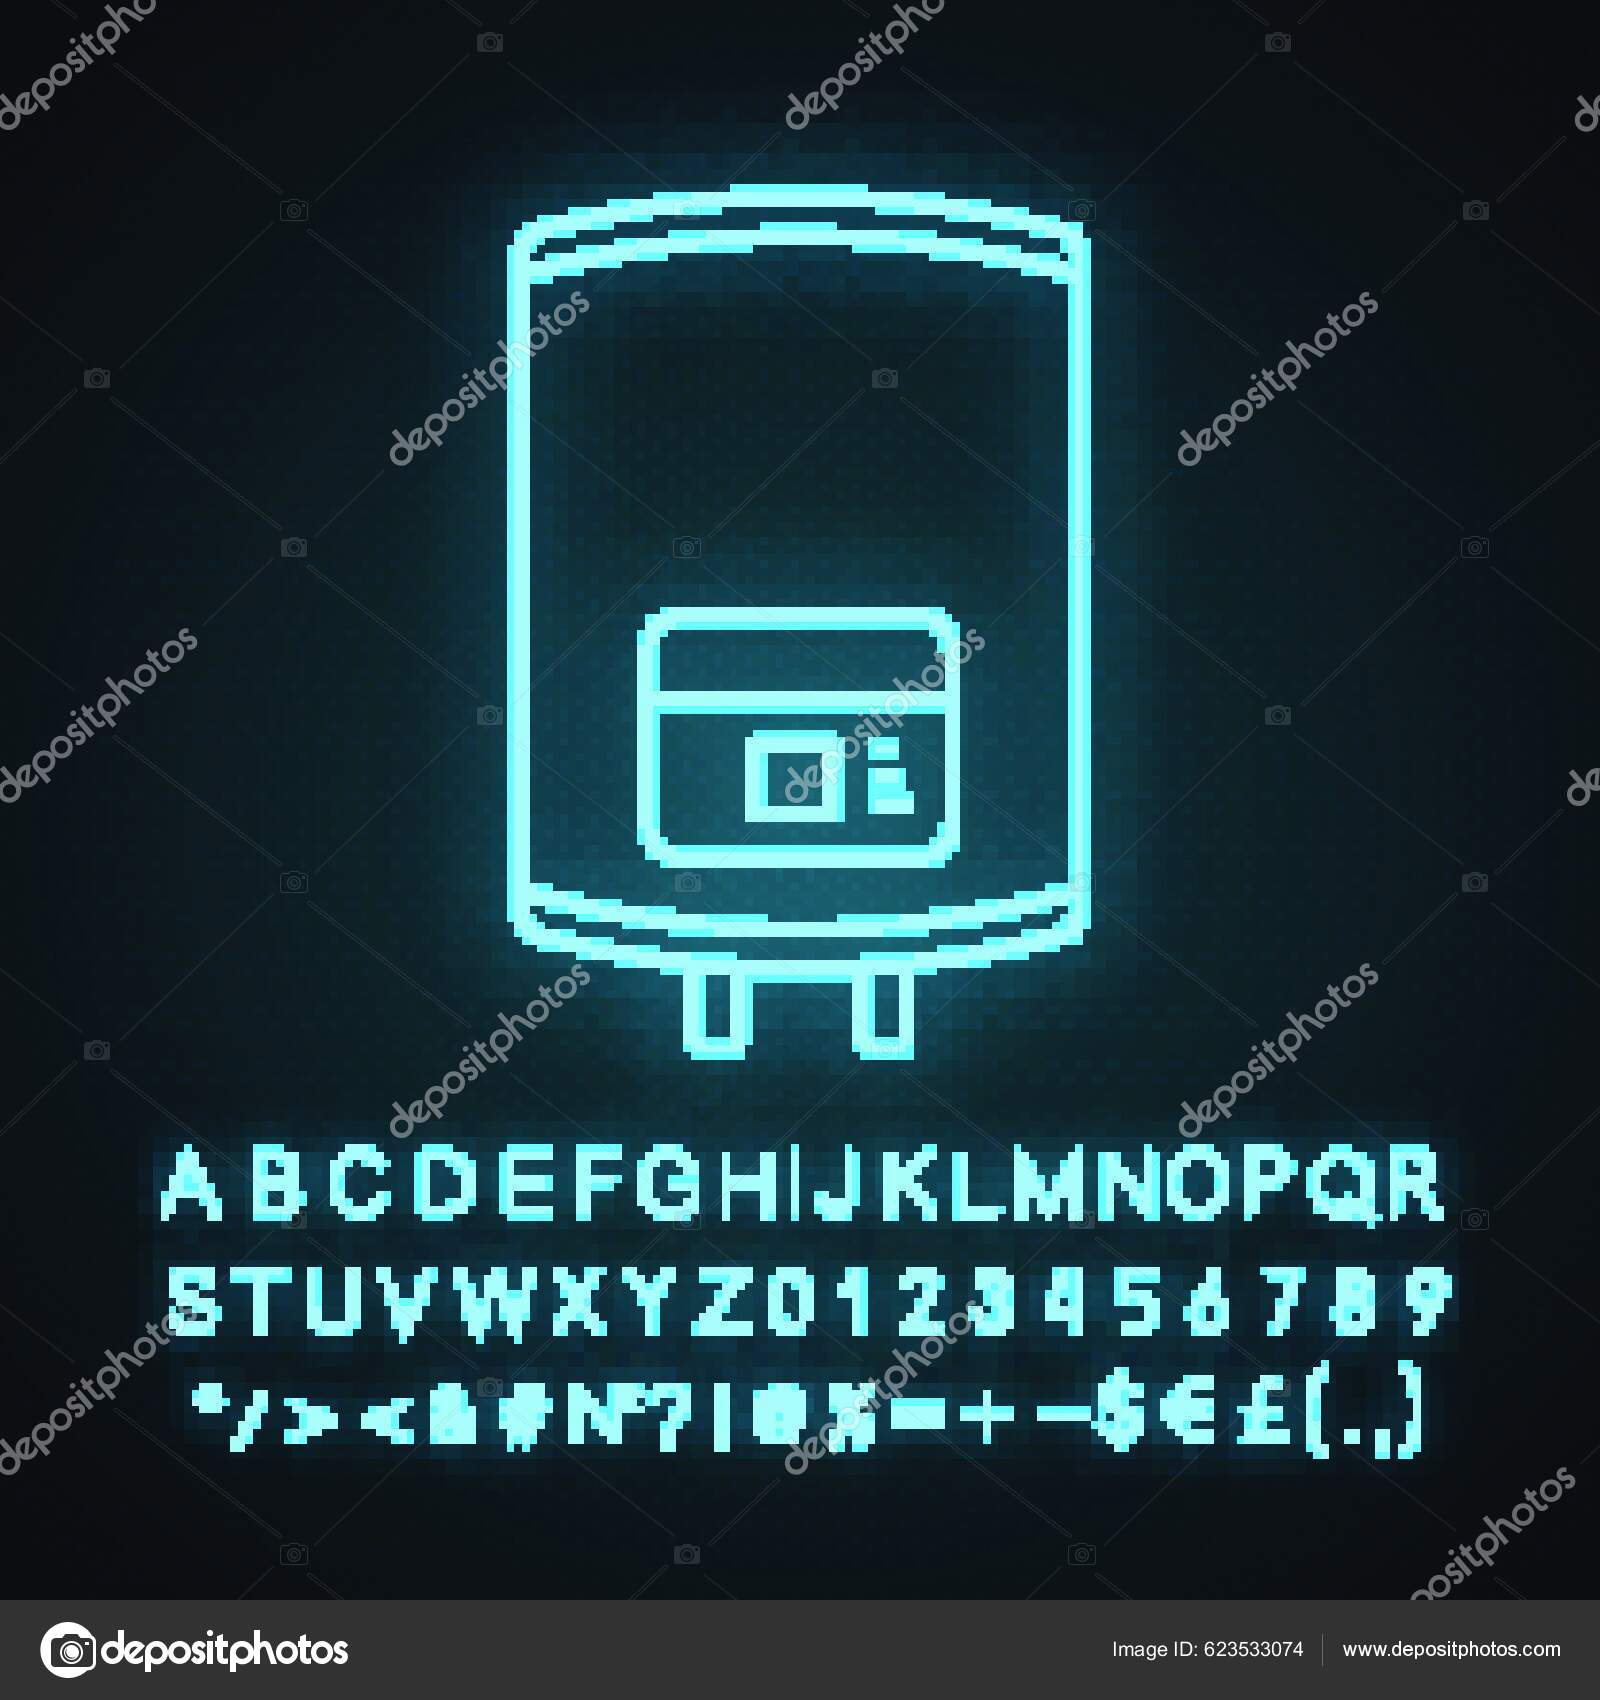 Smartwatch nfc payment neon light icon Royalty Free Vector